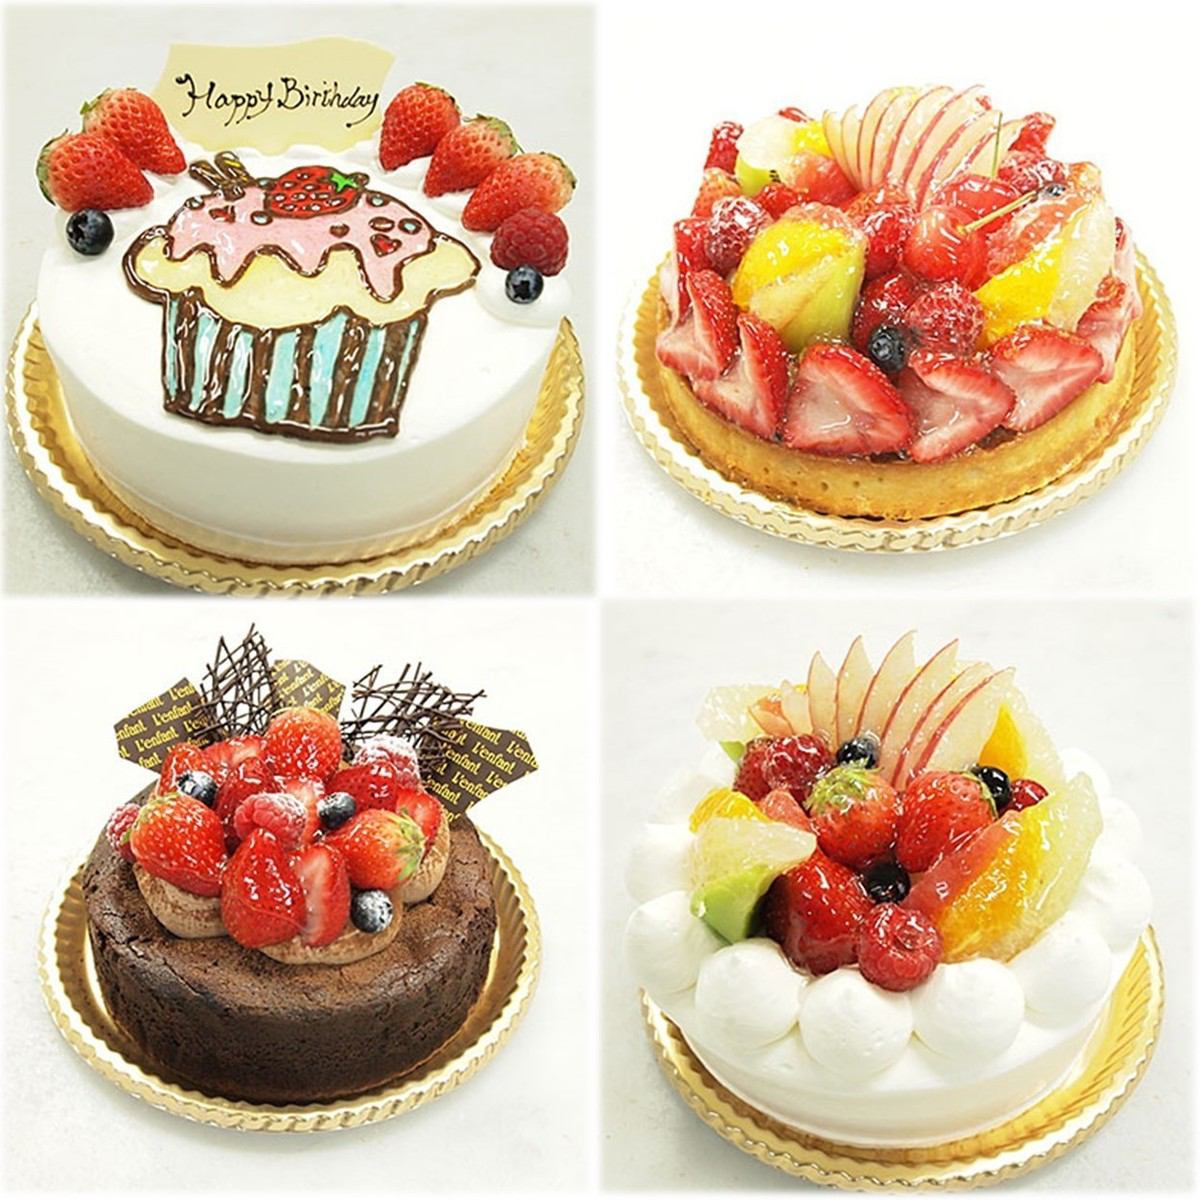 ◎ We accept Christmas cakes for anniversaries, birthdays and various celebrations ♪